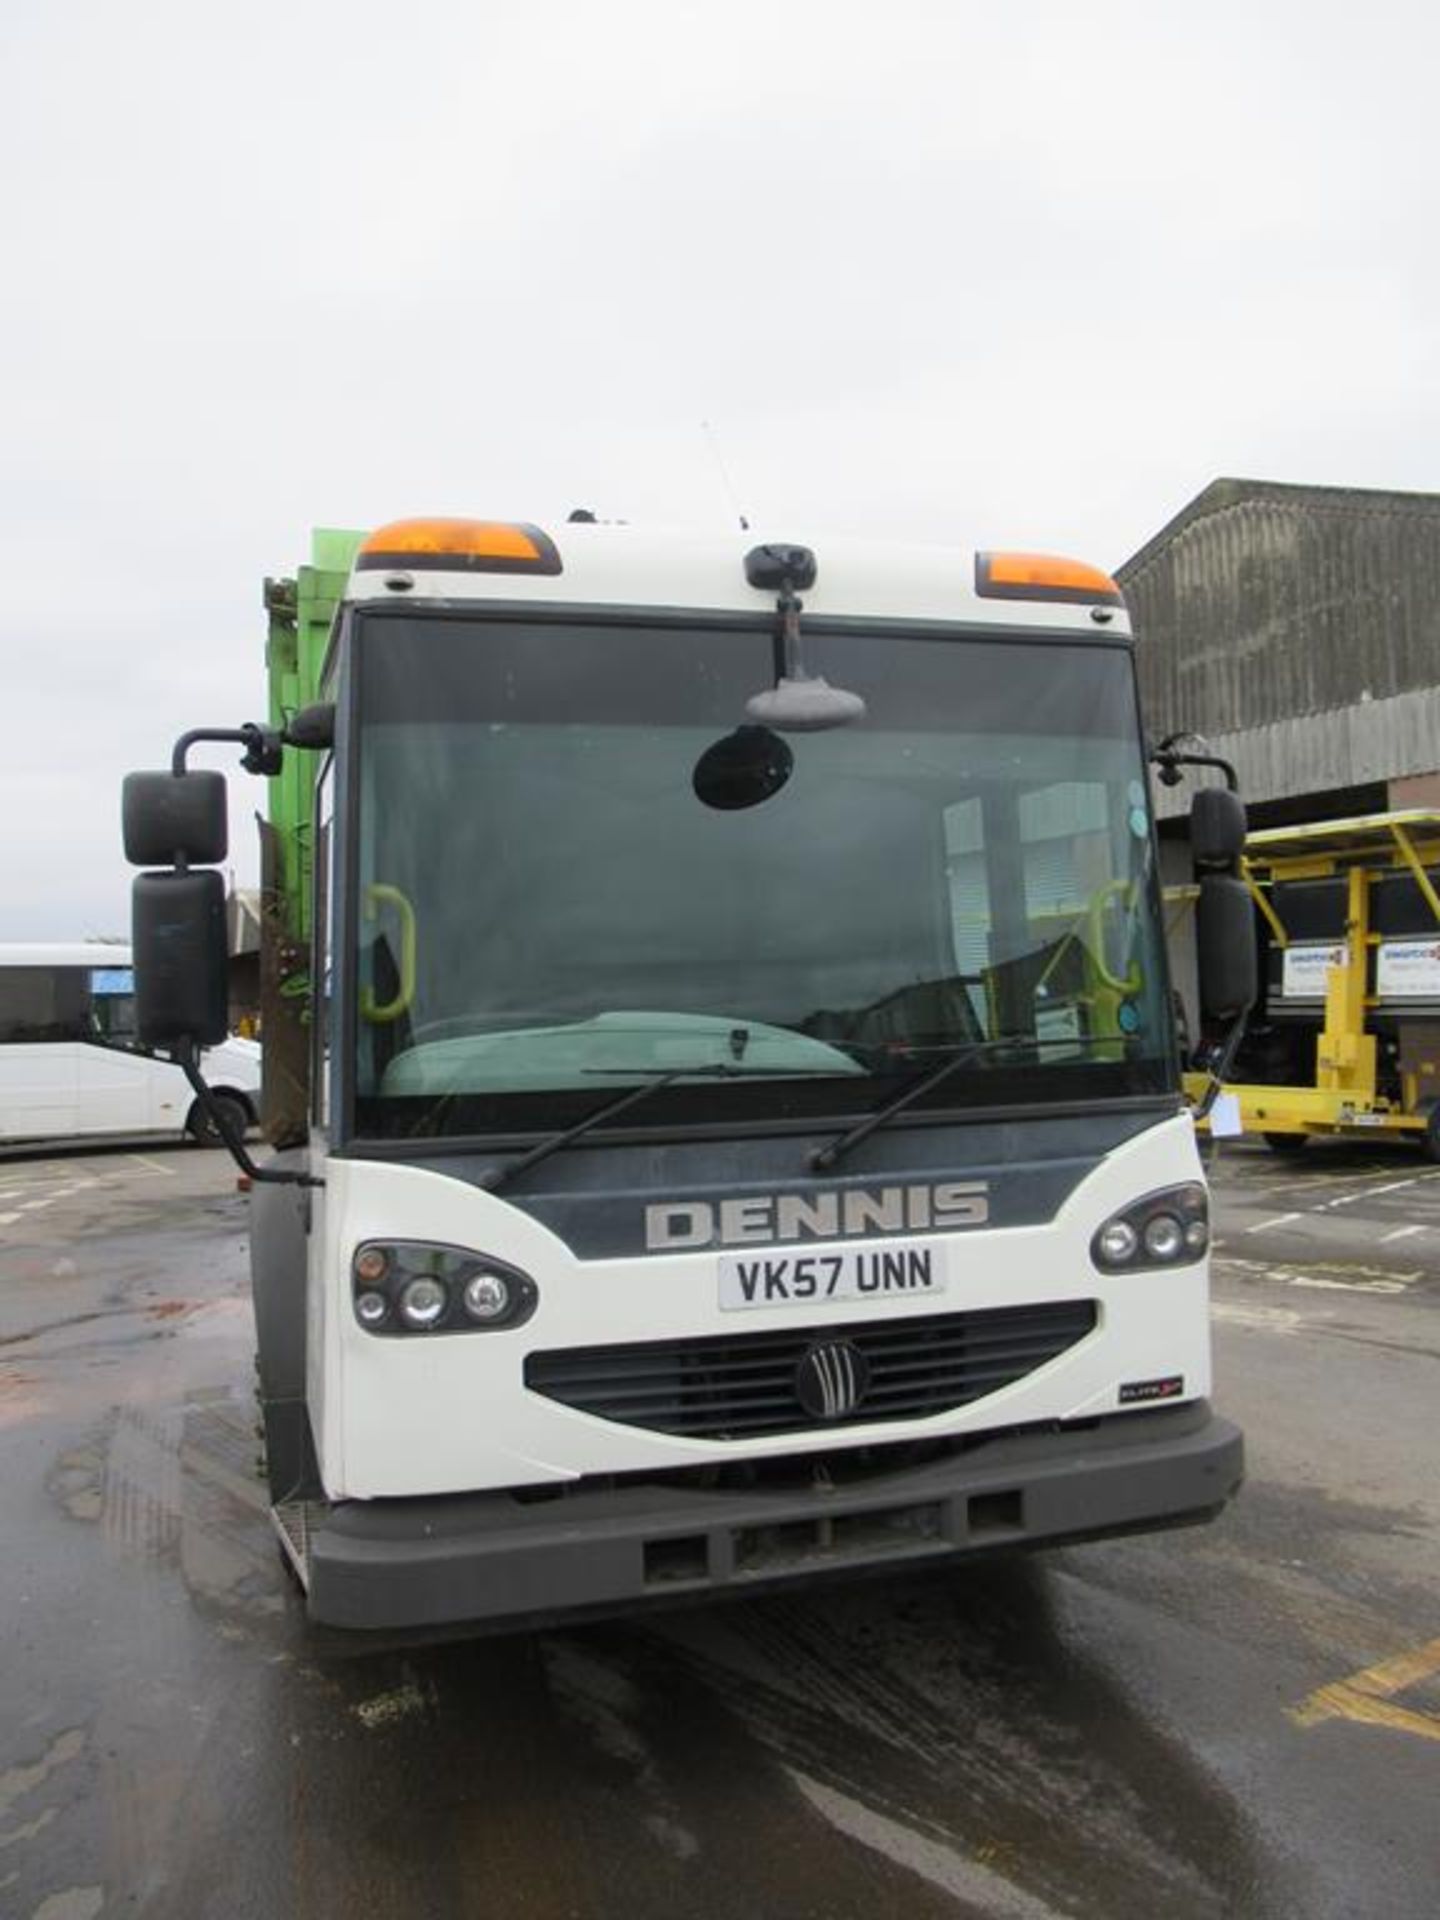 Dennis Eagle Elite 2 One Pass Refuse Collection Vehicle - Image 6 of 34